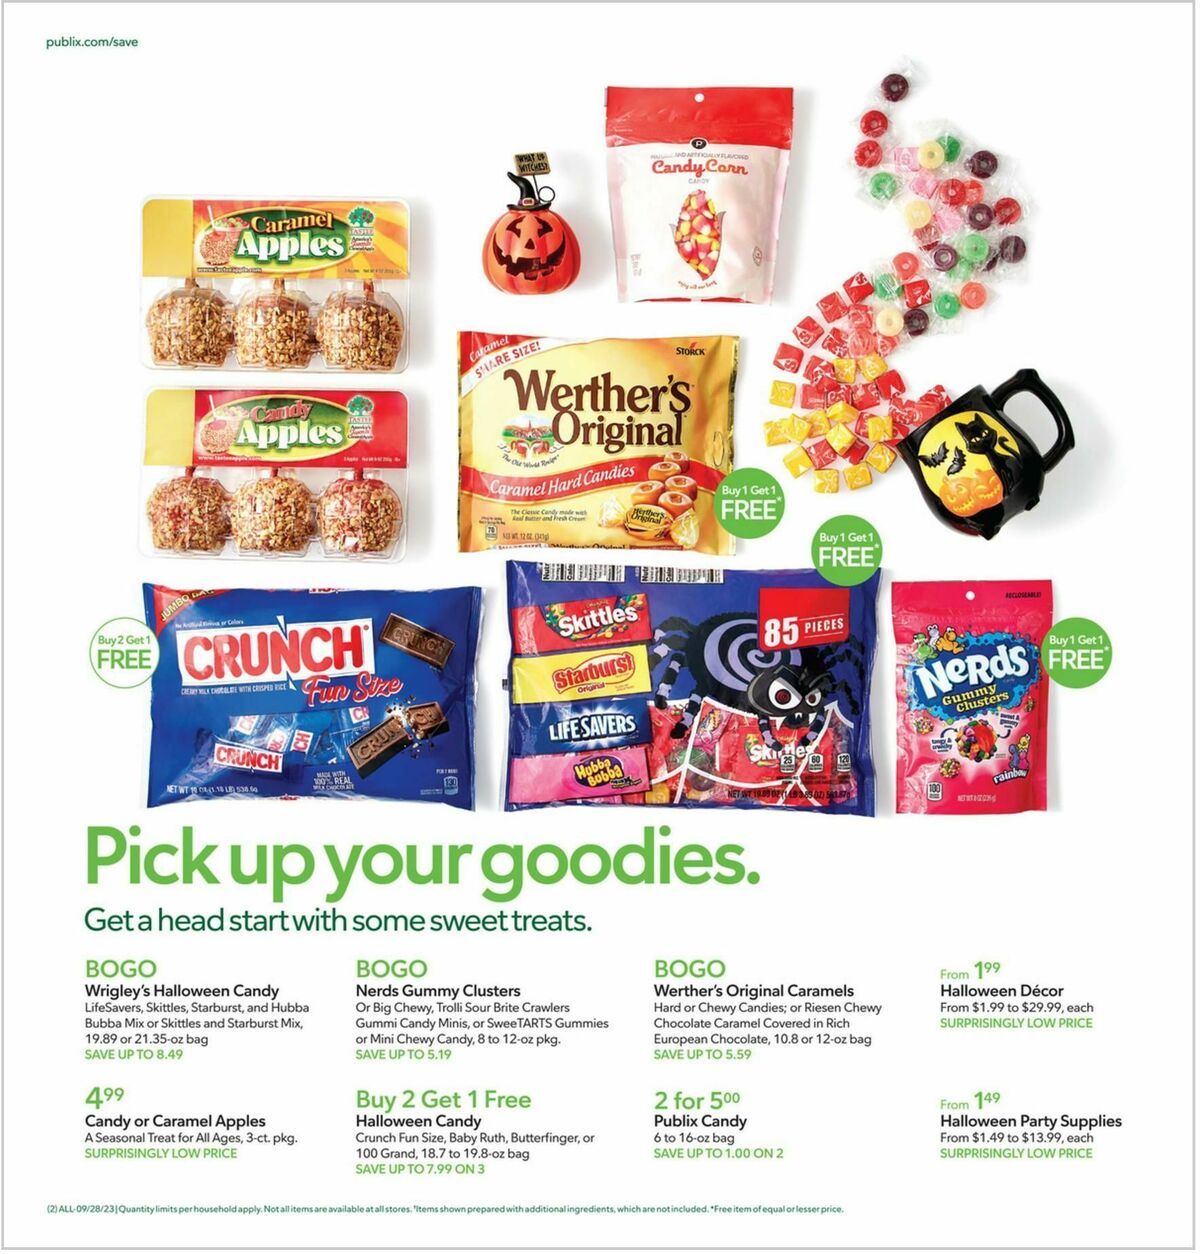 Publix Weekly Ad from September 27